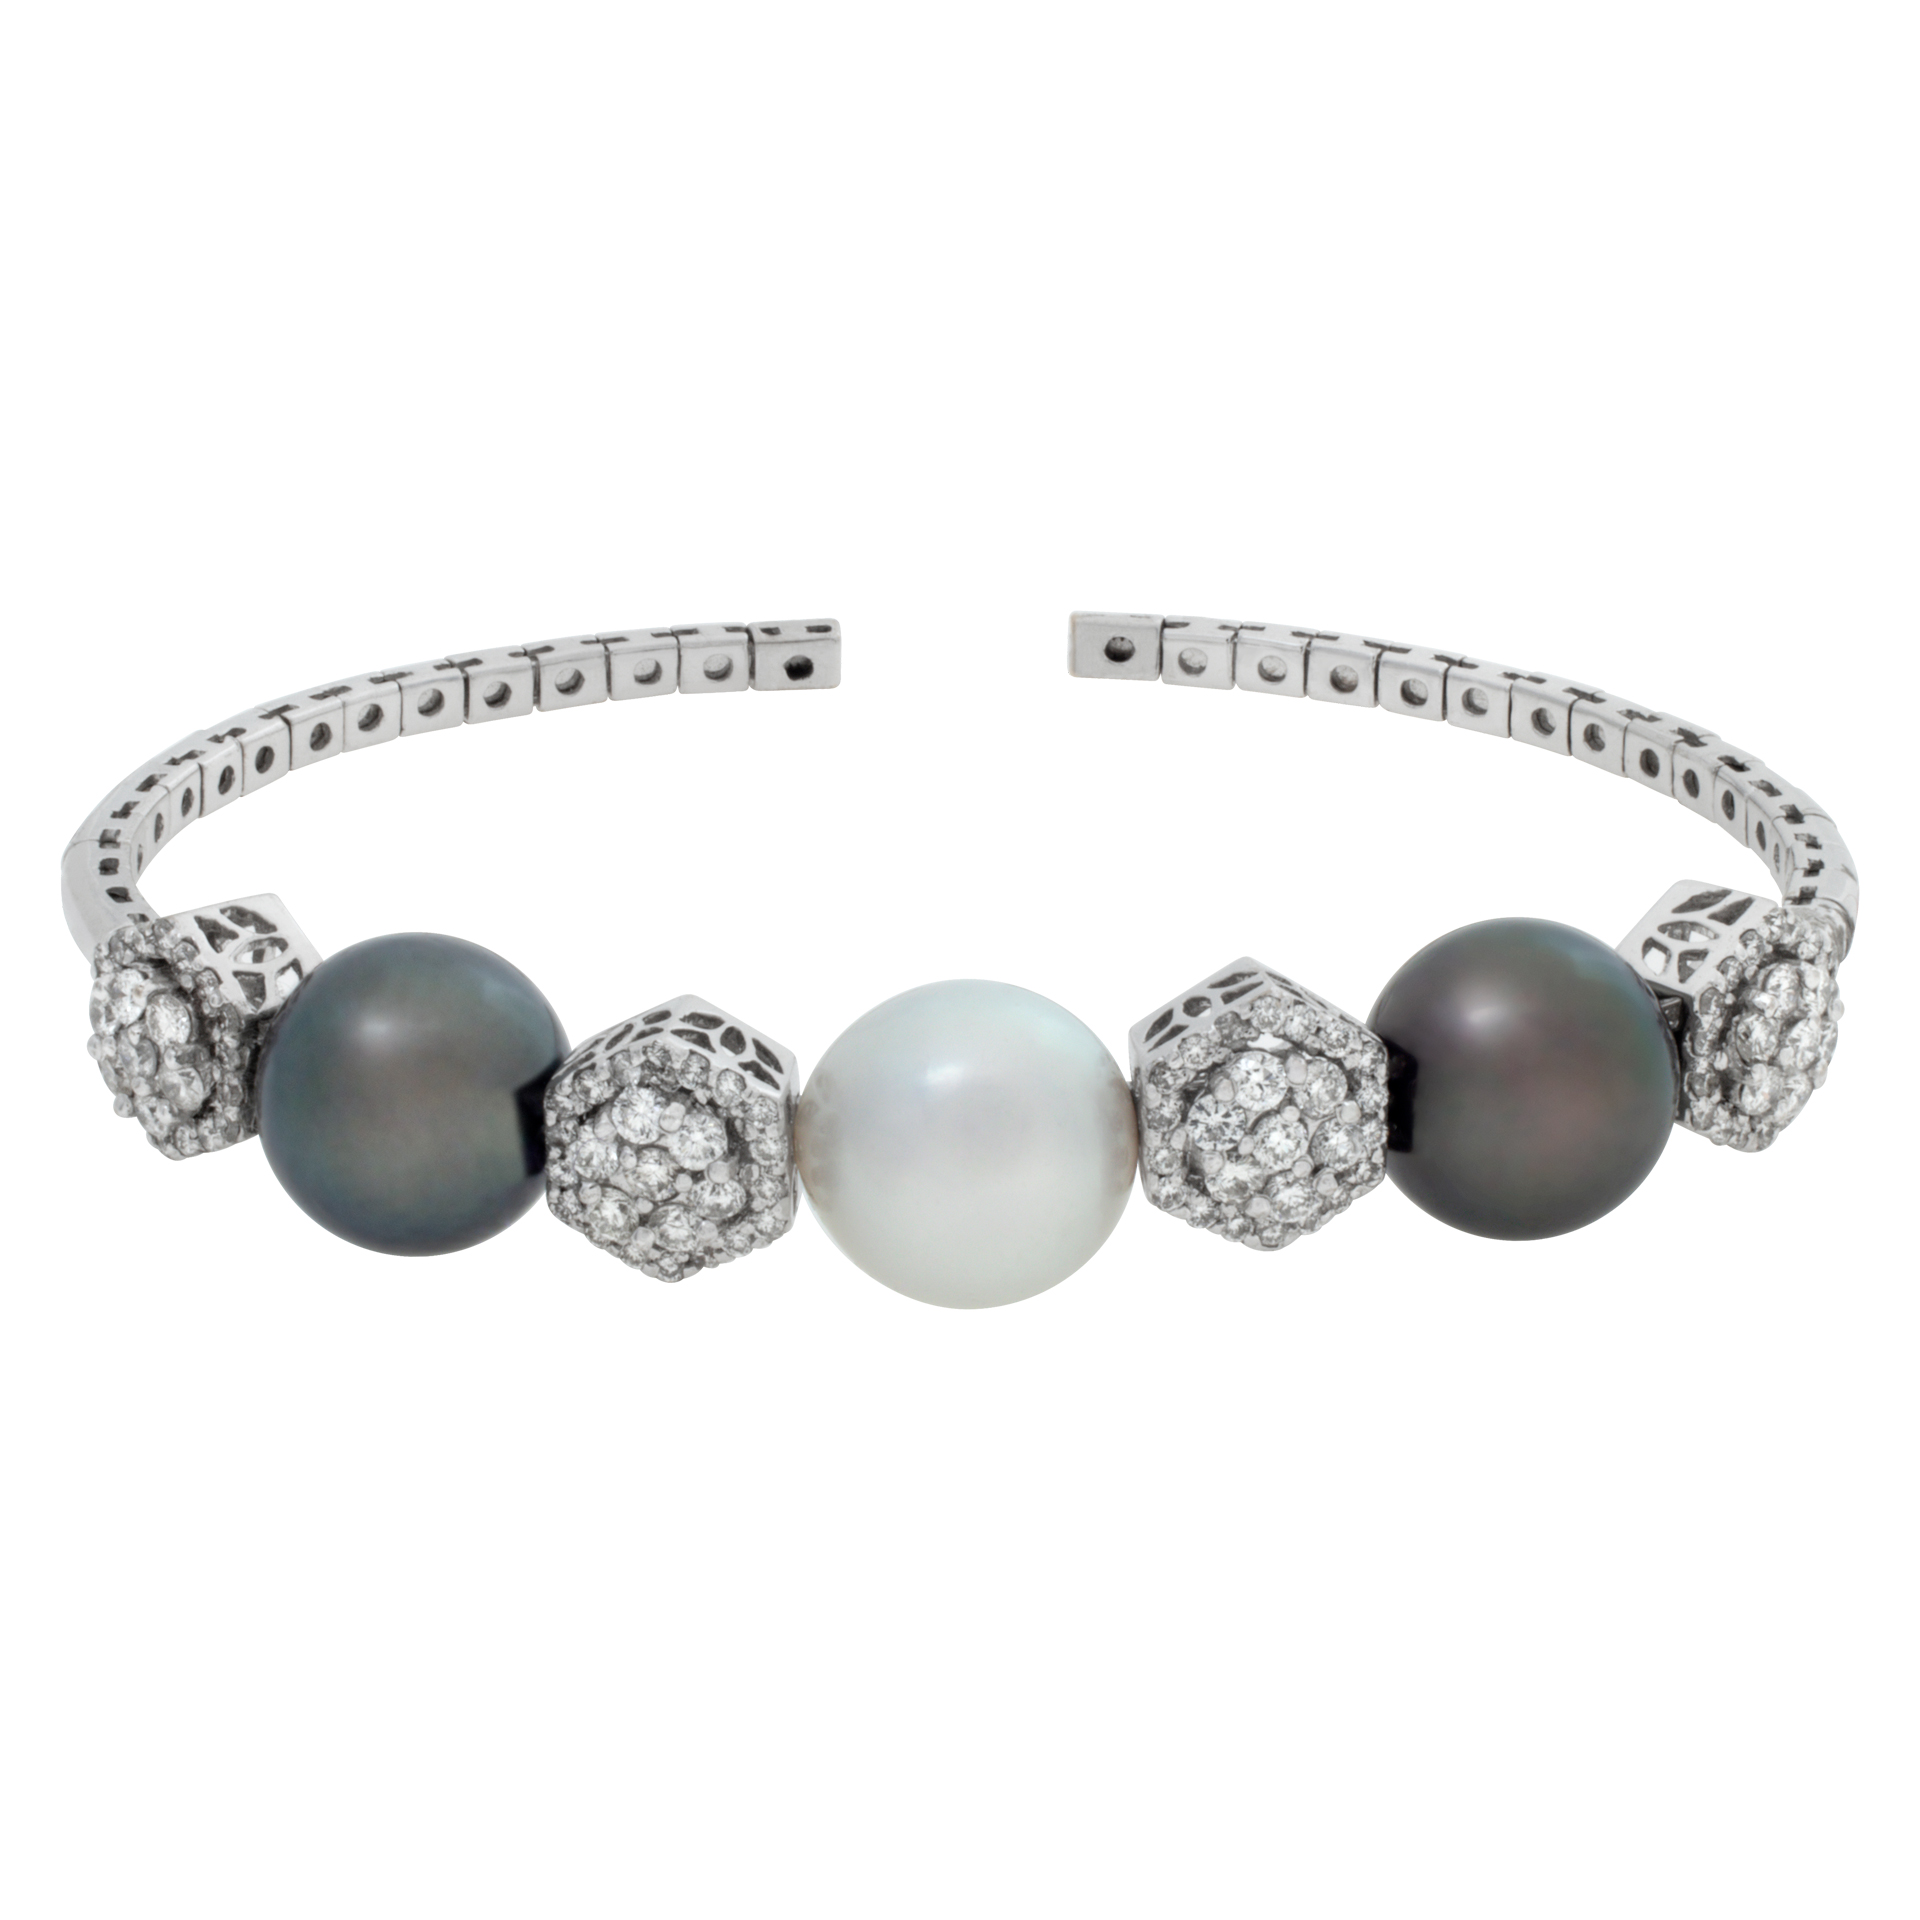 South Sea (white),Tahitian (gray) pearls and diamonds cuff/bangle in 18k. Pearls are 11 x 11.5mm. Round brilliant cut diamonds total approximate weight: 1.31 carat image 1